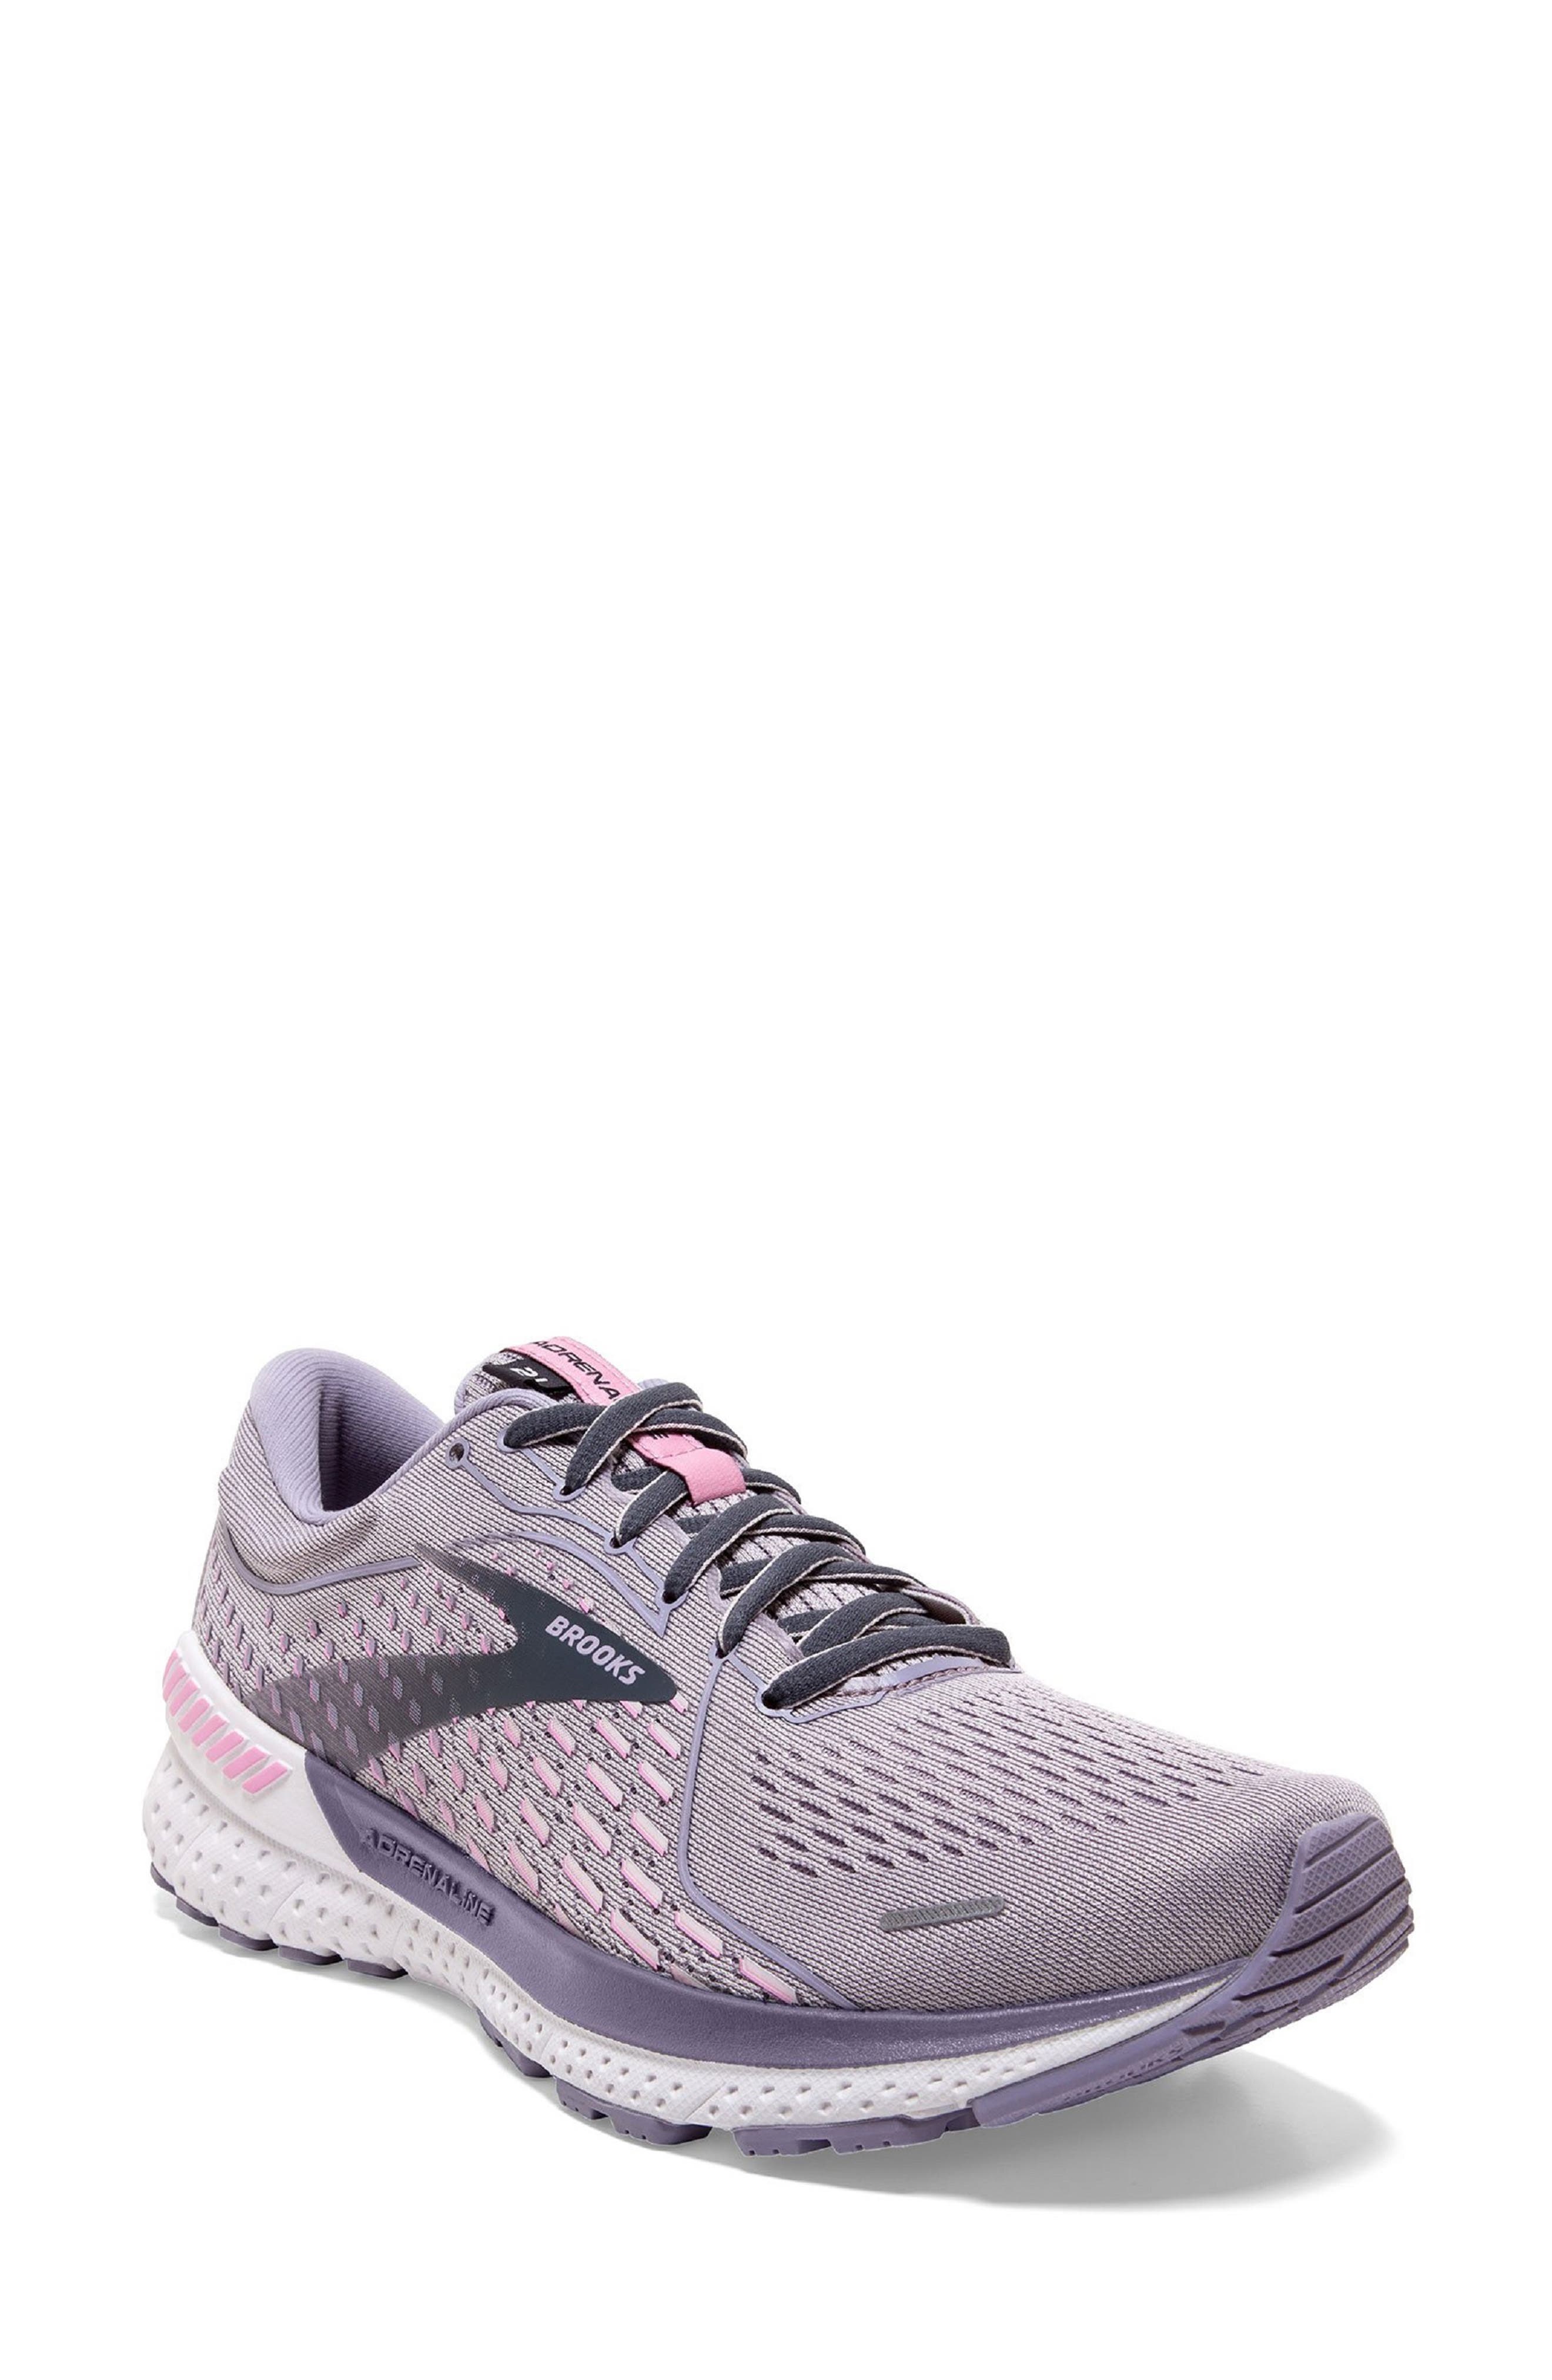 697 Brooks Glycerin 12 Womens Runner B + Free Aus Delivery